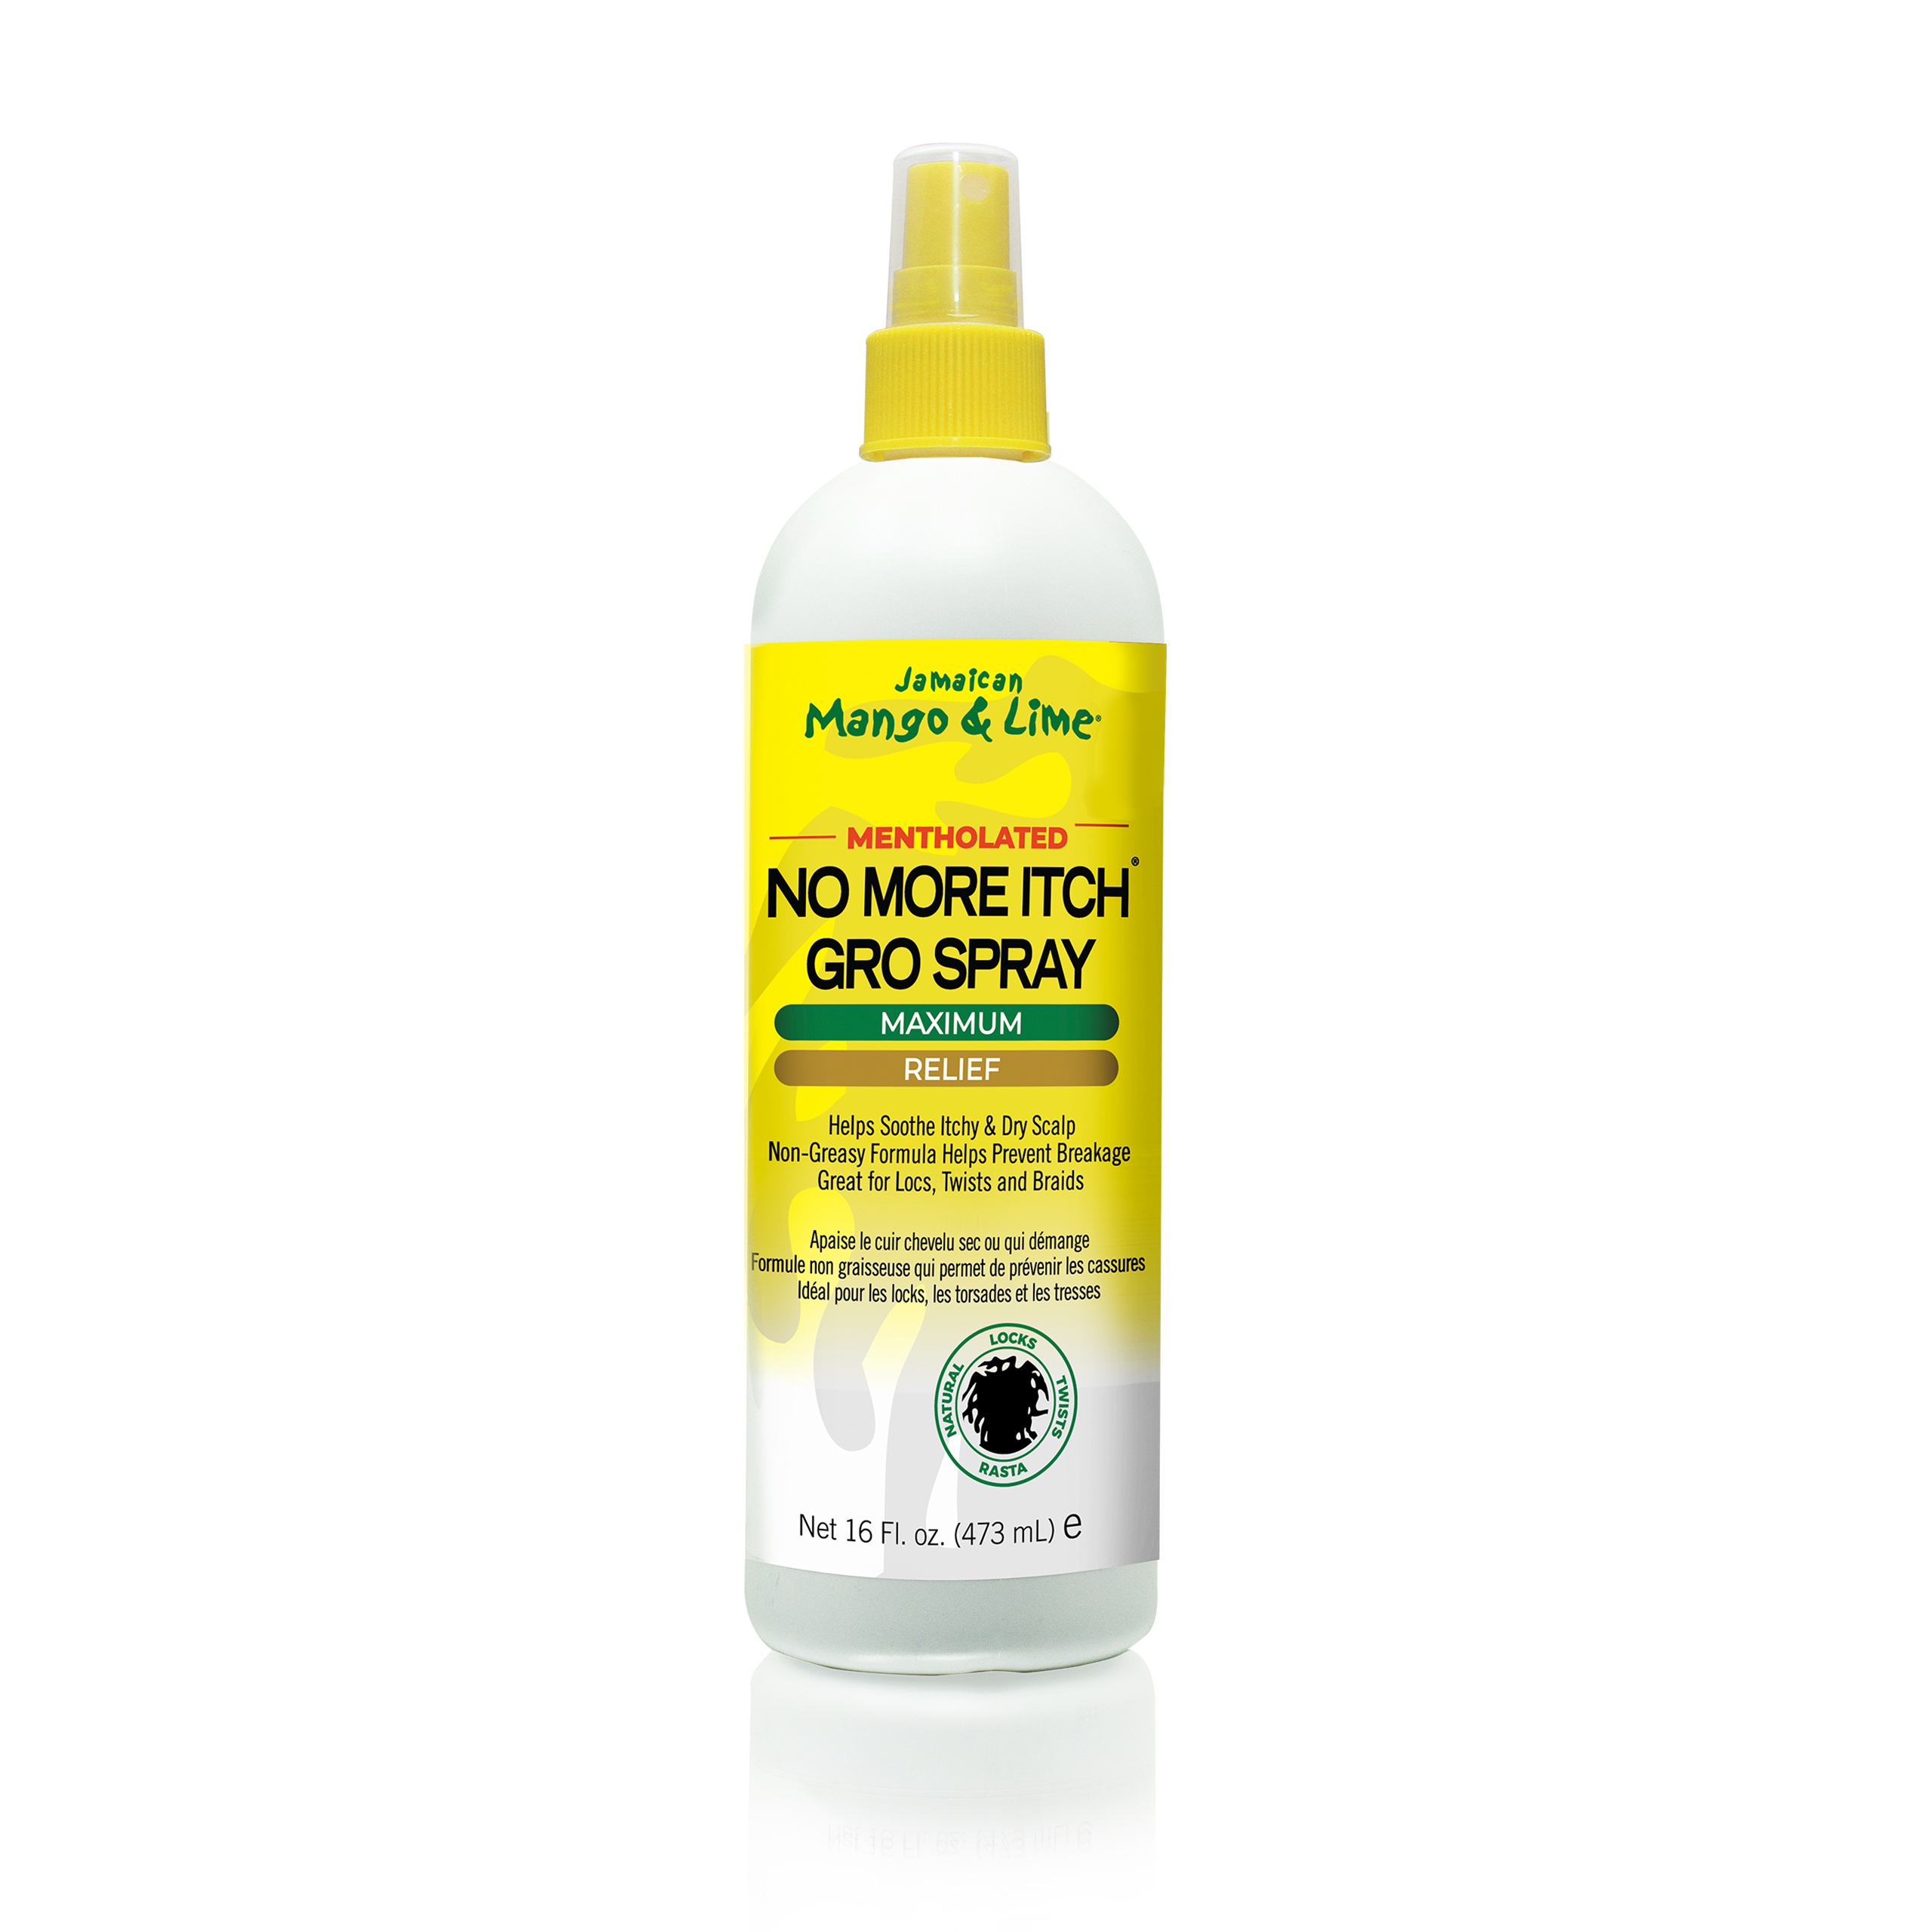 Mentholated No More Itch Gro Spray 16 oz | Jamaican Mango and Lime